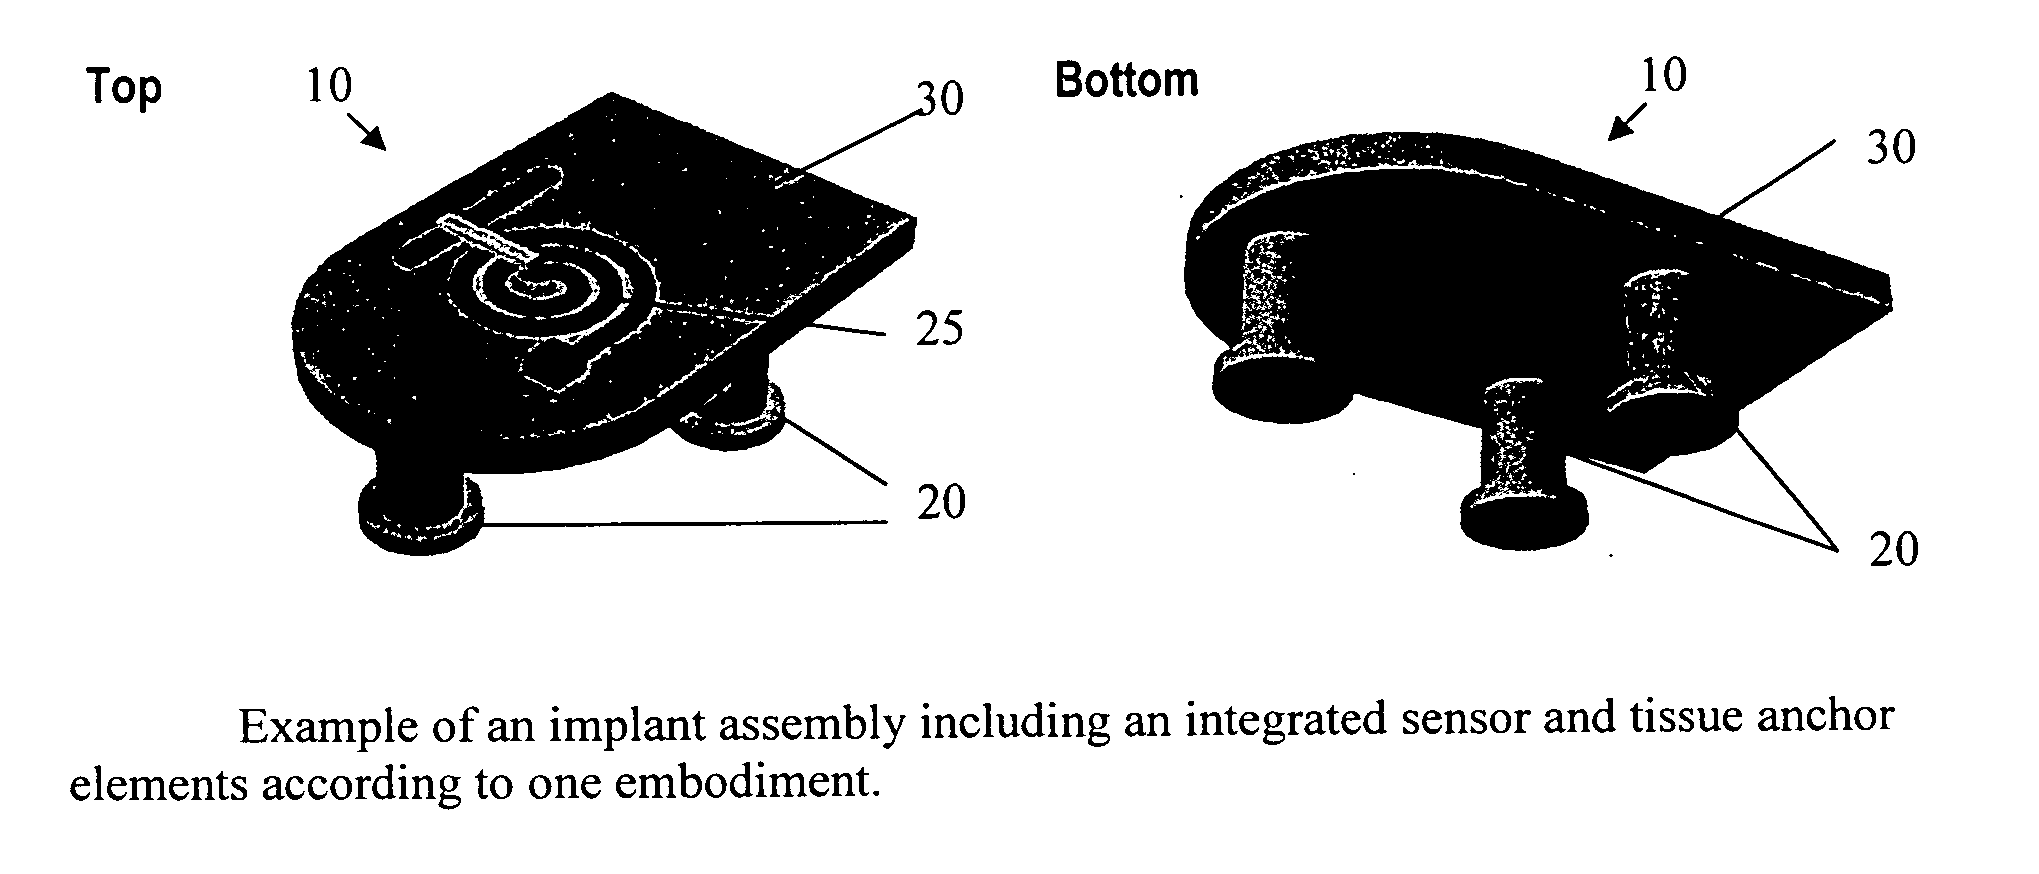 Micromachined tissue anchors for securing implants without sutures